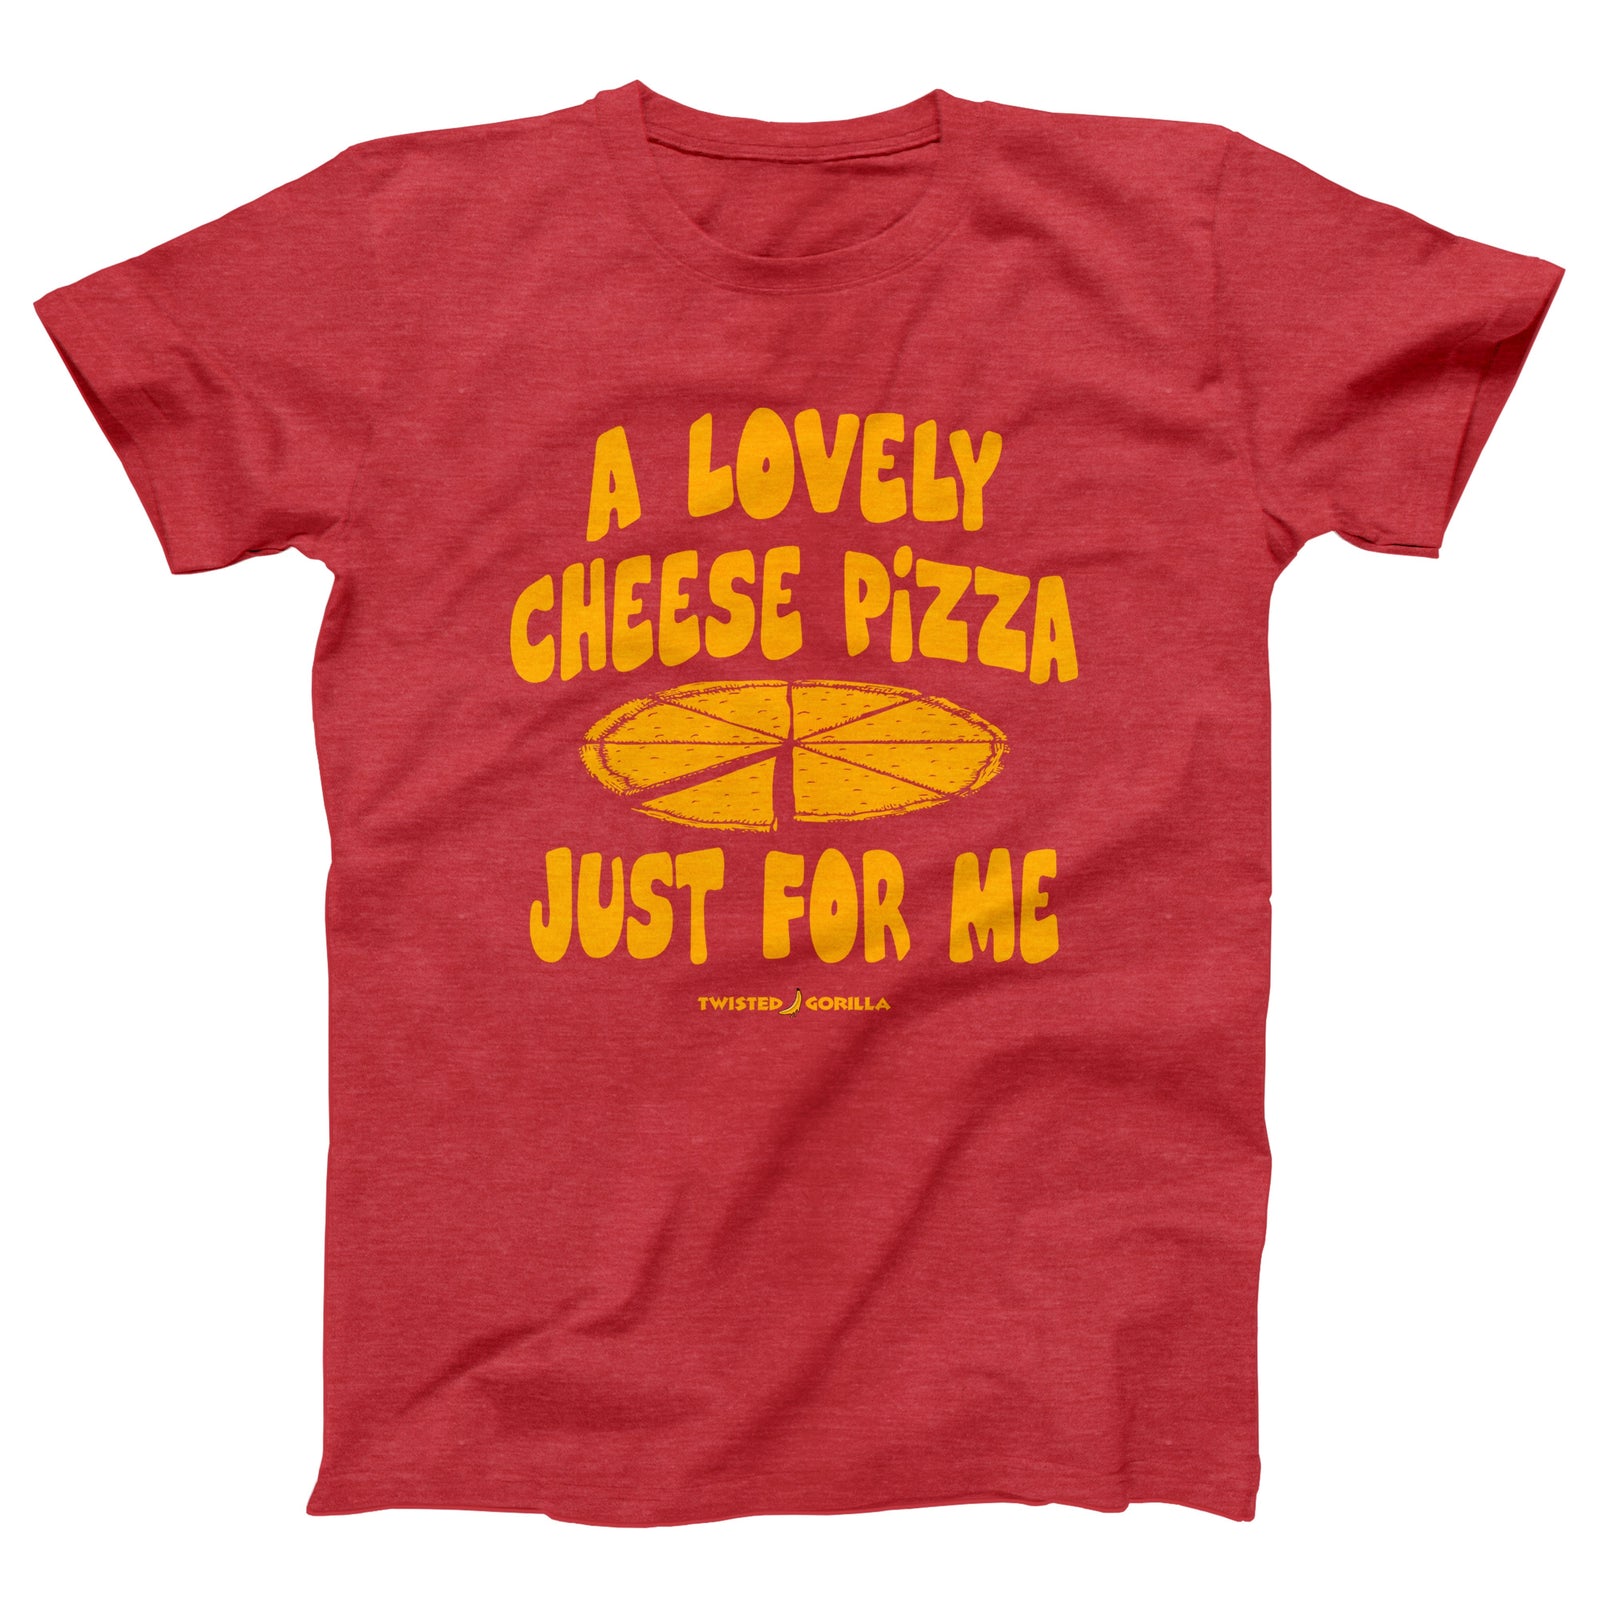 //marionmartigny.com/s/files/1/0274/2488/2766/products/cheese-pizza-just-for-me-menunisex-t-shirt-462153_5000x.jpg?v=1630244126 5000w,
    //marionmartigny.com/s/files/1/0274/2488/2766/products/cheese-pizza-just-for-me-menunisex-t-shirt-462153_4500x.jpg?v=1630244126 4500w,
    //marionmartigny.com/s/files/1/0274/2488/2766/products/cheese-pizza-just-for-me-menunisex-t-shirt-462153_4000x.jpg?v=1630244126 4000w,
    //marionmartigny.com/s/files/1/0274/2488/2766/products/cheese-pizza-just-for-me-menunisex-t-shirt-462153_3500x.jpg?v=1630244126 3500w,
    //marionmartigny.com/s/files/1/0274/2488/2766/products/cheese-pizza-just-for-me-menunisex-t-shirt-462153_3000x.jpg?v=1630244126 3000w,
    //marionmartigny.com/s/files/1/0274/2488/2766/products/cheese-pizza-just-for-me-menunisex-t-shirt-462153_2500x.jpg?v=1630244126 2500w,
    //marionmartigny.com/s/files/1/0274/2488/2766/products/cheese-pizza-just-for-me-menunisex-t-shirt-462153_2000x.jpg?v=1630244126 2000w,
    //marionmartigny.com/s/files/1/0274/2488/2766/products/cheese-pizza-just-for-me-menunisex-t-shirt-462153_1800x.jpg?v=1630244126 1800w,
    //marionmartigny.com/s/files/1/0274/2488/2766/products/cheese-pizza-just-for-me-menunisex-t-shirt-462153_1600x.jpg?v=1630244126 1600w,
    //marionmartigny.com/s/files/1/0274/2488/2766/products/cheese-pizza-just-for-me-menunisex-t-shirt-462153_1400x.jpg?v=1630244126 1400w,
    //marionmartigny.com/s/files/1/0274/2488/2766/products/cheese-pizza-just-for-me-menunisex-t-shirt-462153_1200x.jpg?v=1630244126 1200w,
    //marionmartigny.com/s/files/1/0274/2488/2766/products/cheese-pizza-just-for-me-menunisex-t-shirt-462153_1000x.jpg?v=1630244126 1000w,
    //marionmartigny.com/s/files/1/0274/2488/2766/products/cheese-pizza-just-for-me-menunisex-t-shirt-462153_800x.jpg?v=1630244126 800w,
    //marionmartigny.com/s/files/1/0274/2488/2766/products/cheese-pizza-just-for-me-menunisex-t-shirt-462153_600x.jpg?v=1630244126 600w,
    //marionmartigny.com/s/files/1/0274/2488/2766/products/cheese-pizza-just-for-me-menunisex-t-shirt-462153_400x.jpg?v=1630244126 400w,
    //marionmartigny.com/s/files/1/0274/2488/2766/products/cheese-pizza-just-for-me-menunisex-t-shirt-462153_200x.jpg?v=1630244126 200w